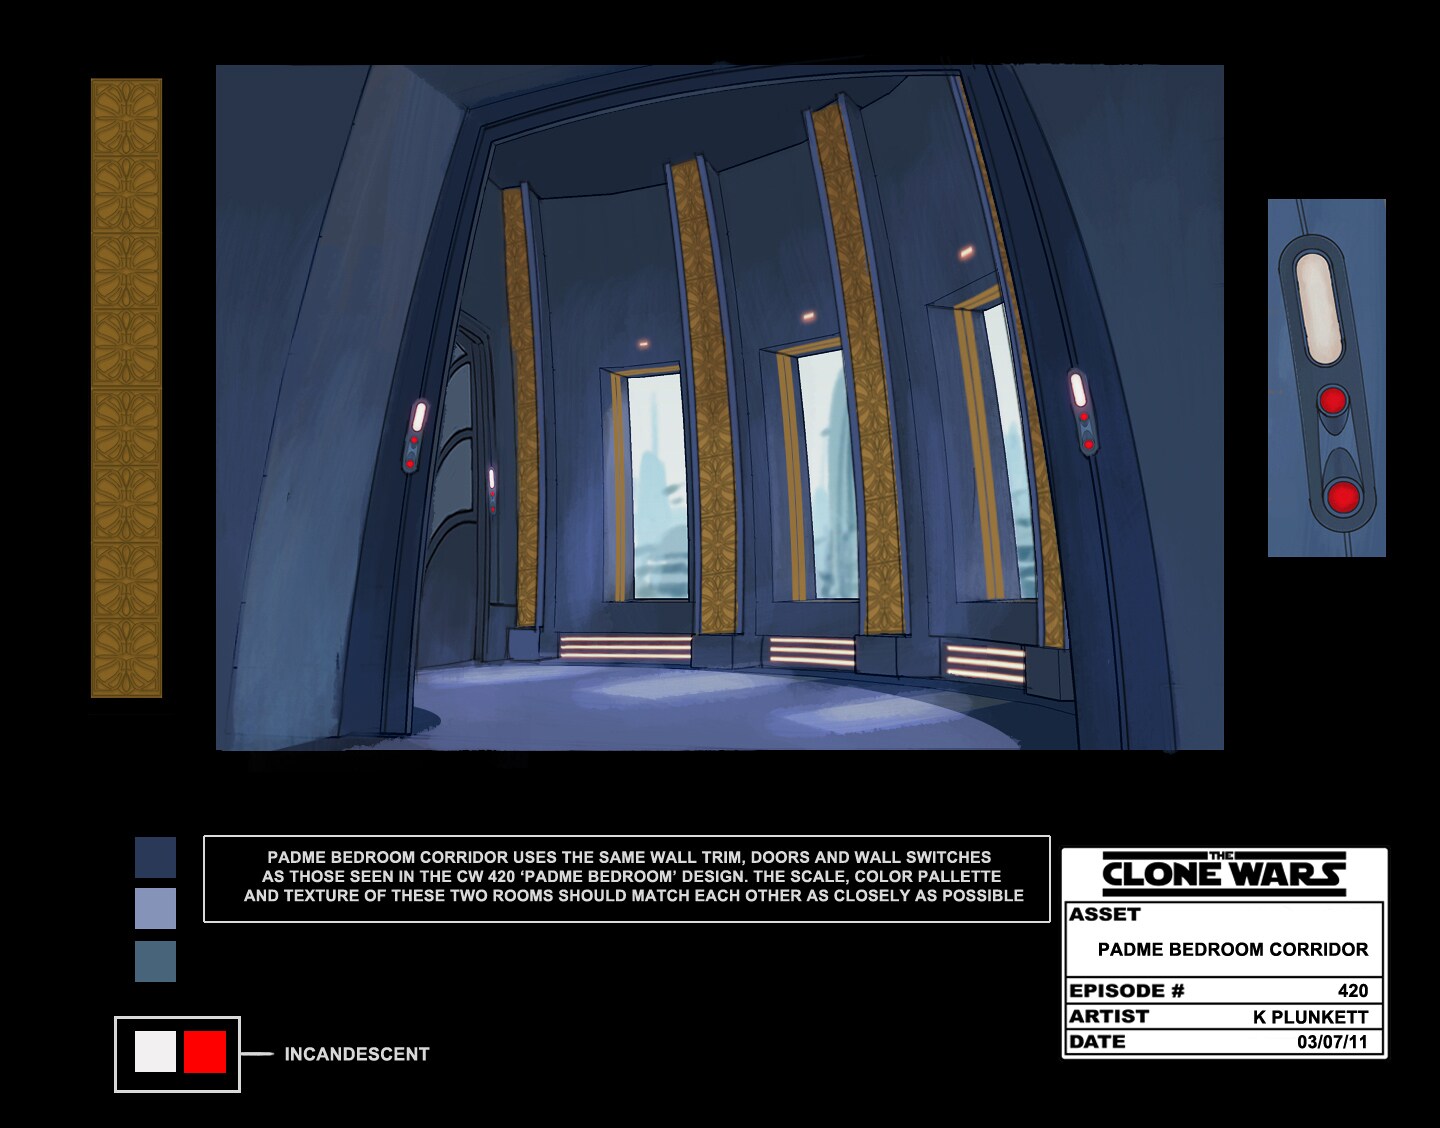 Anakin's quarters in the Jedi Temple illustration (dated February 22, 2011).